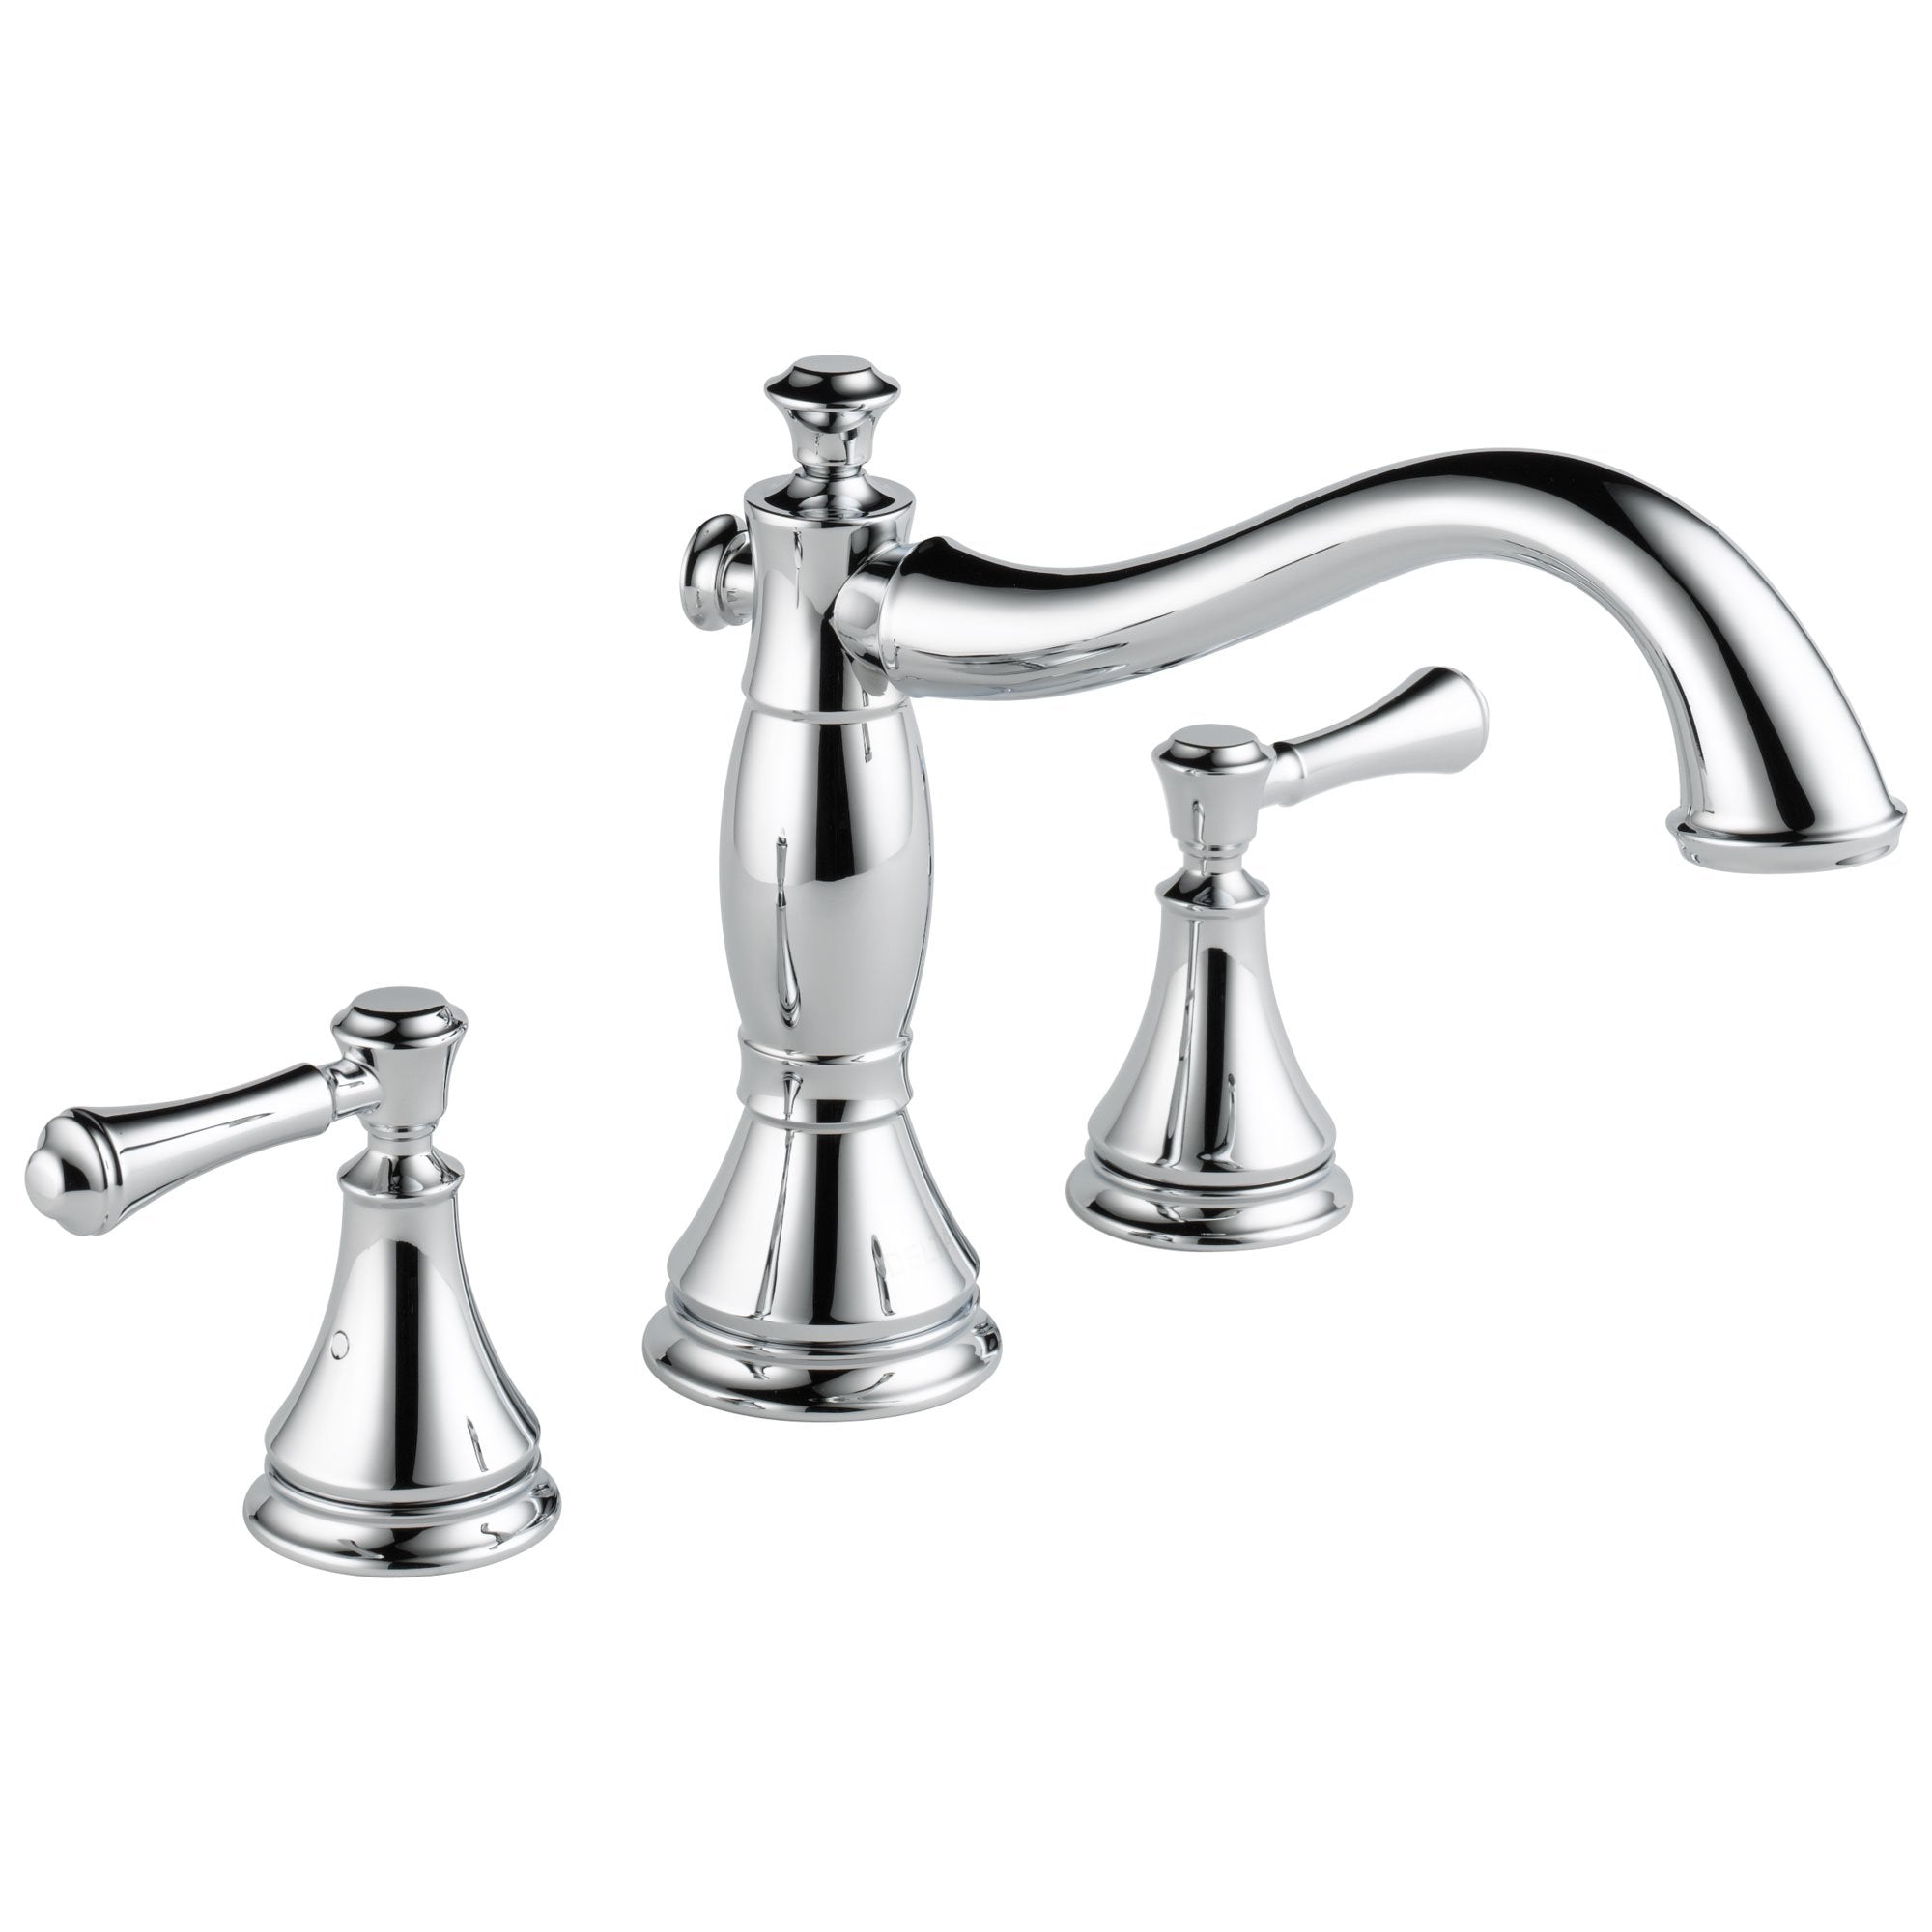 Delta Cassidy Collection Chrome Finish Roman Tub Filler Faucet COMPLETE ITEM Includes (2) Lever Handles and Rough-in Valve D1437V